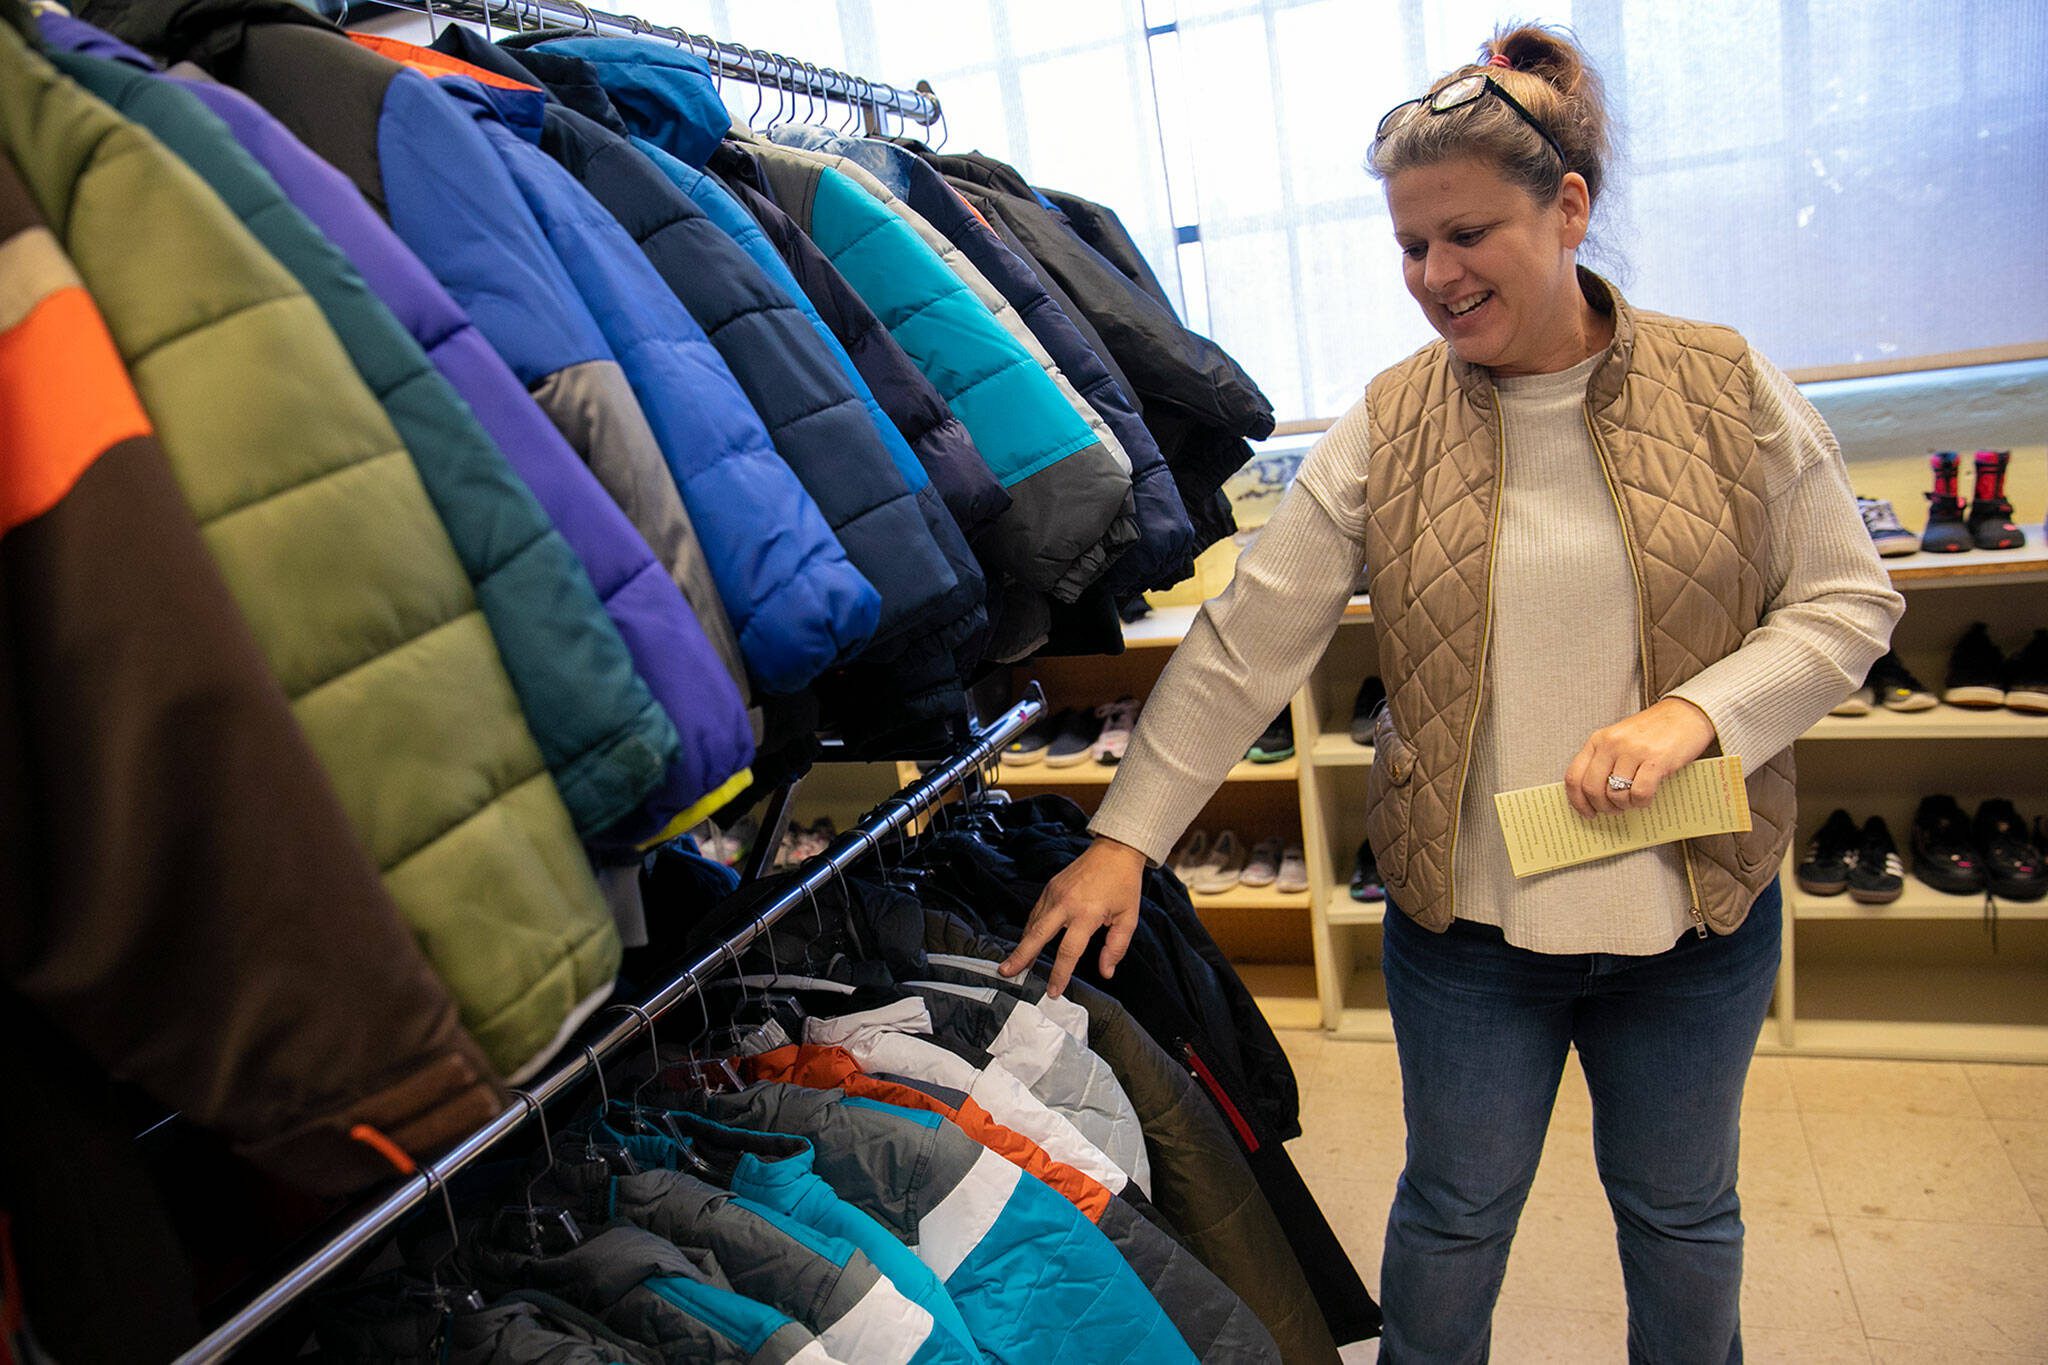 Site Manager Larissa Spencer sifts through some newly donated jackets at Arlington Kids’ Kloset on Nov. 17, in Arlington. (Ryan Berry / The Herald)